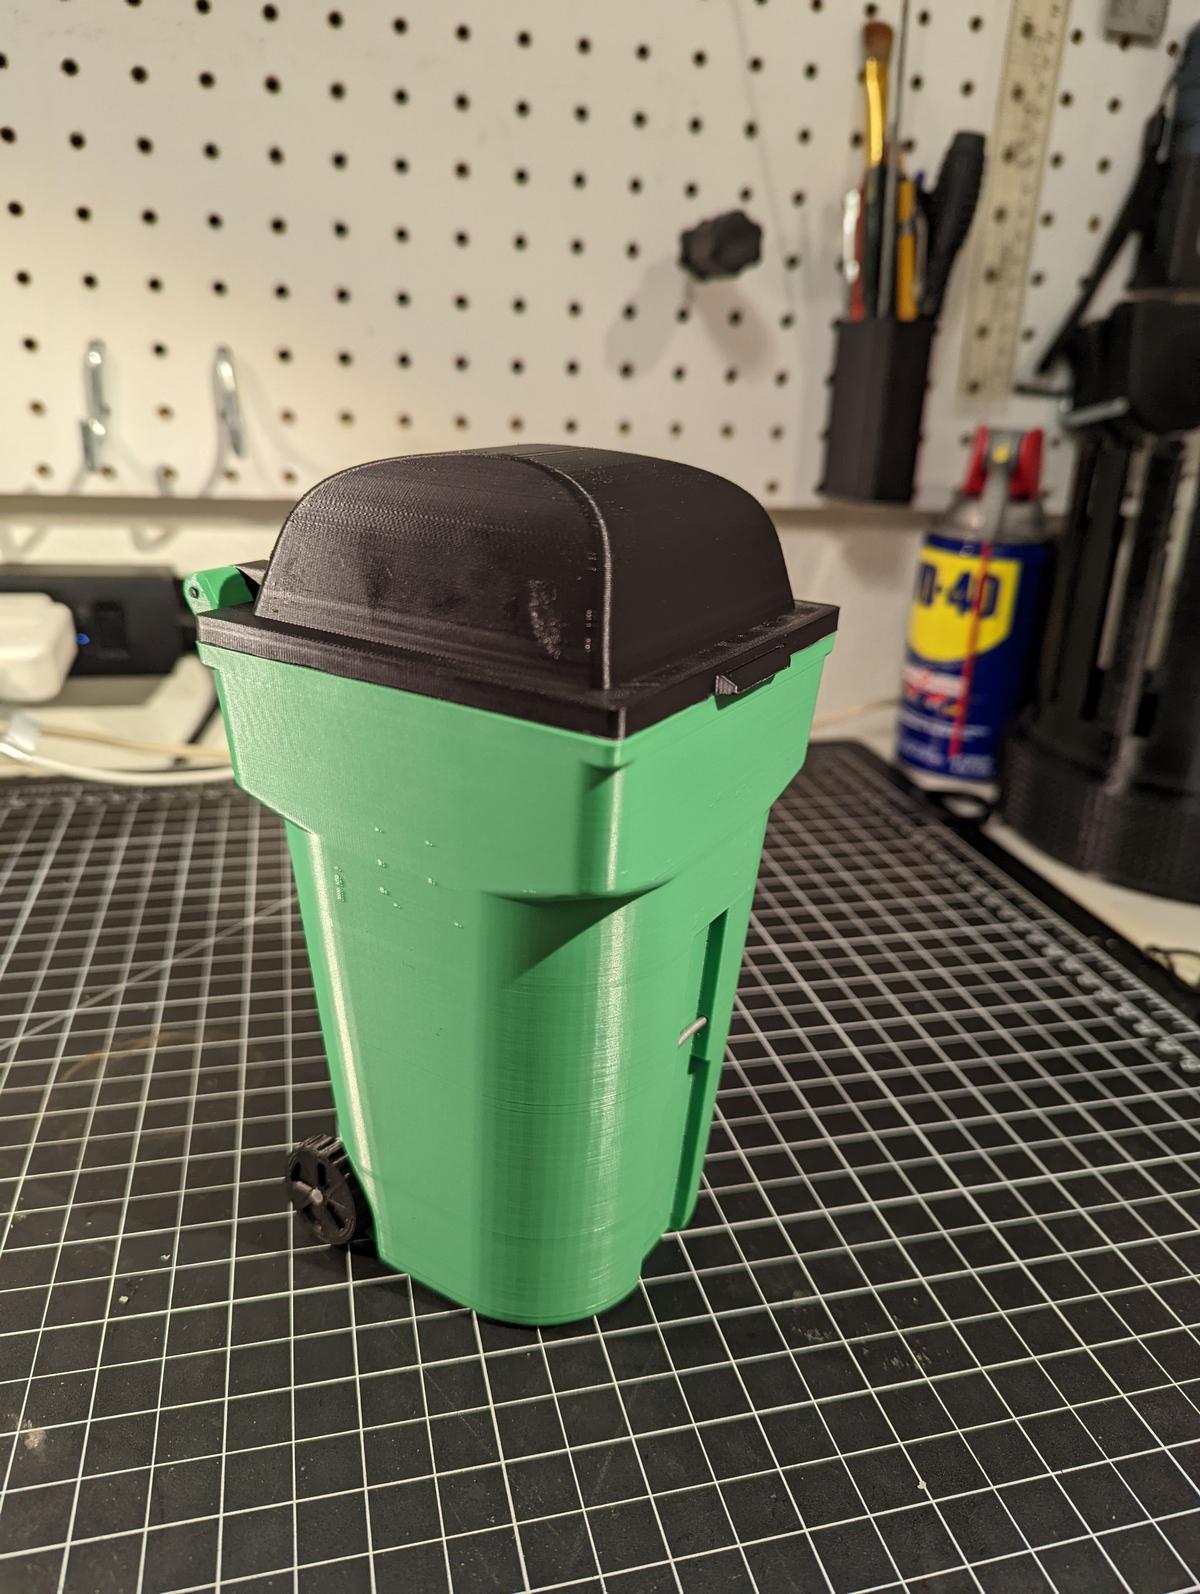 BIG Trash Can - Pen Cup, Trash Can, or Recycling Bin! - 3D model by  MandicReally on Thangs